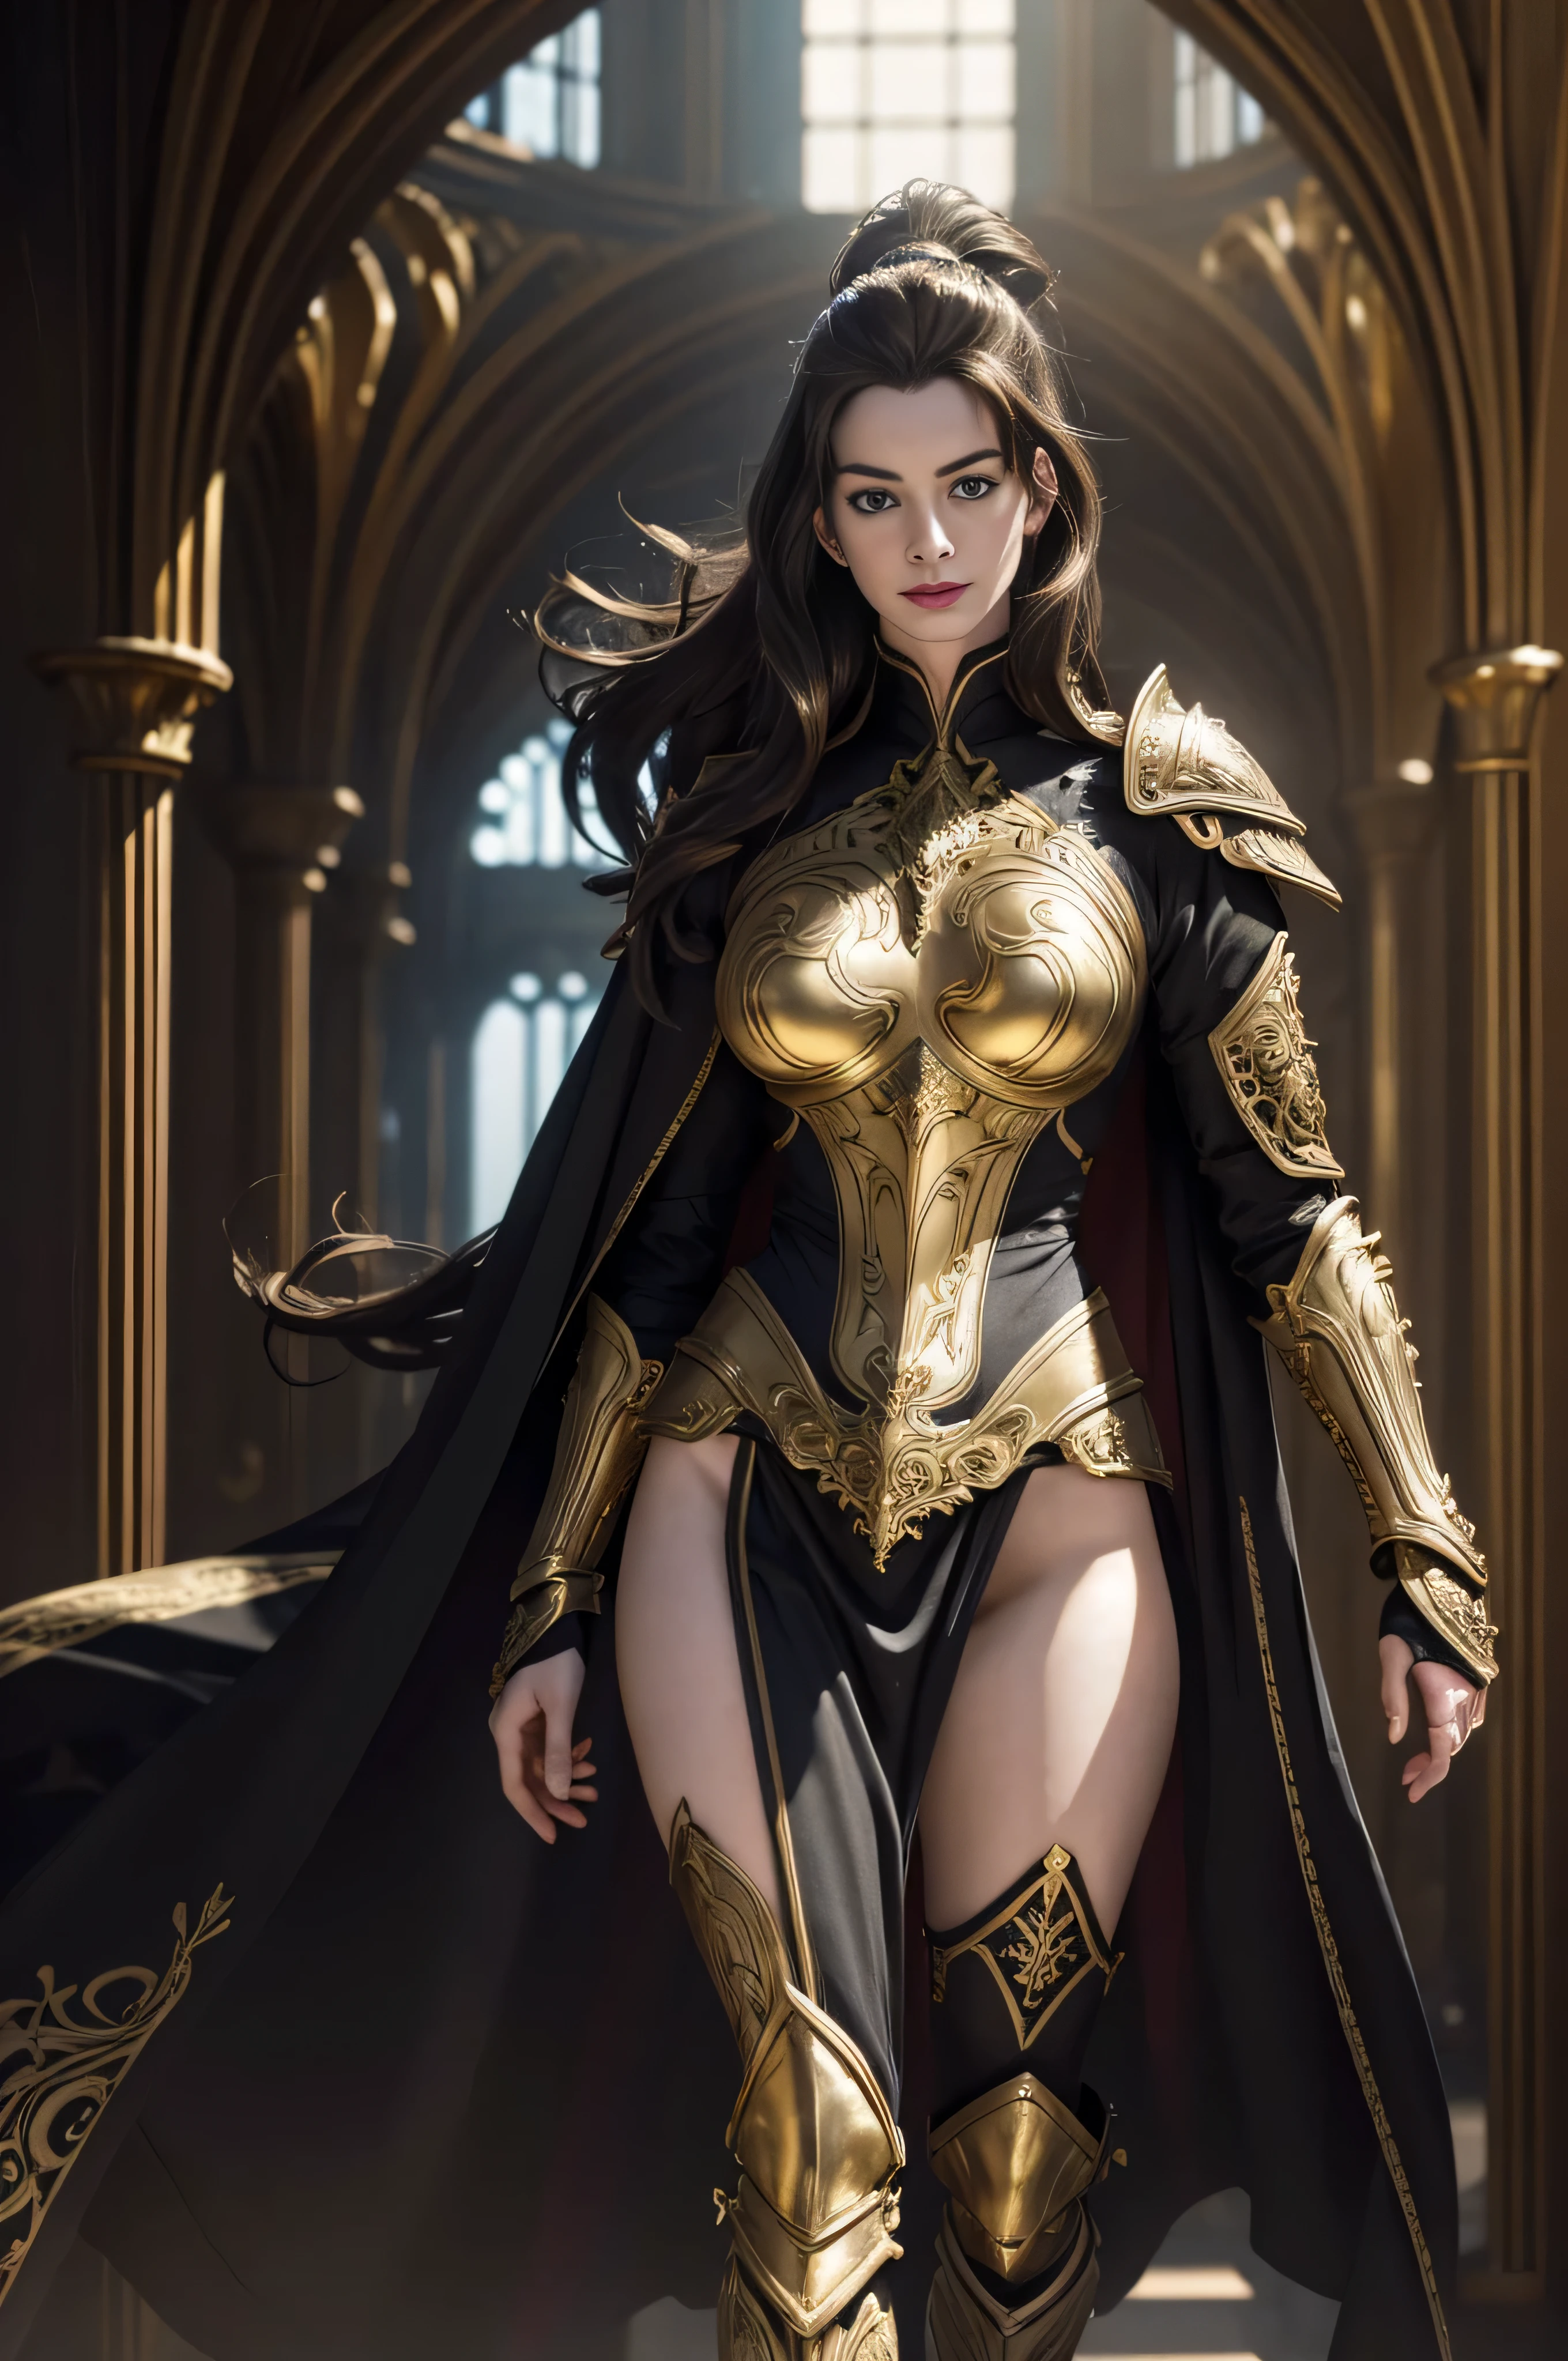 ((Anne Hathaway in ornate gold plate armor)), award winning concept art of tall (1girl) in ornate plate armor , high long ponytail, dramatic long flowing hair, model on runway, epic, god rays, centered, (masterpiece:1.2), (best quality:1.2), Amazing, highly detailed, beautiful, finely detail, warm soft color grading, Depth of field, extremely detailed 8k, fine art, stunning, iridescent, shiny, light reflections, crisp, curls, wind, flying sand, dynamic pose, hyper realism, vibrant, sunlit, edge detection, (miniskirt exposing panties), pelvic cover, thigh high boots, knees, long flowing cape